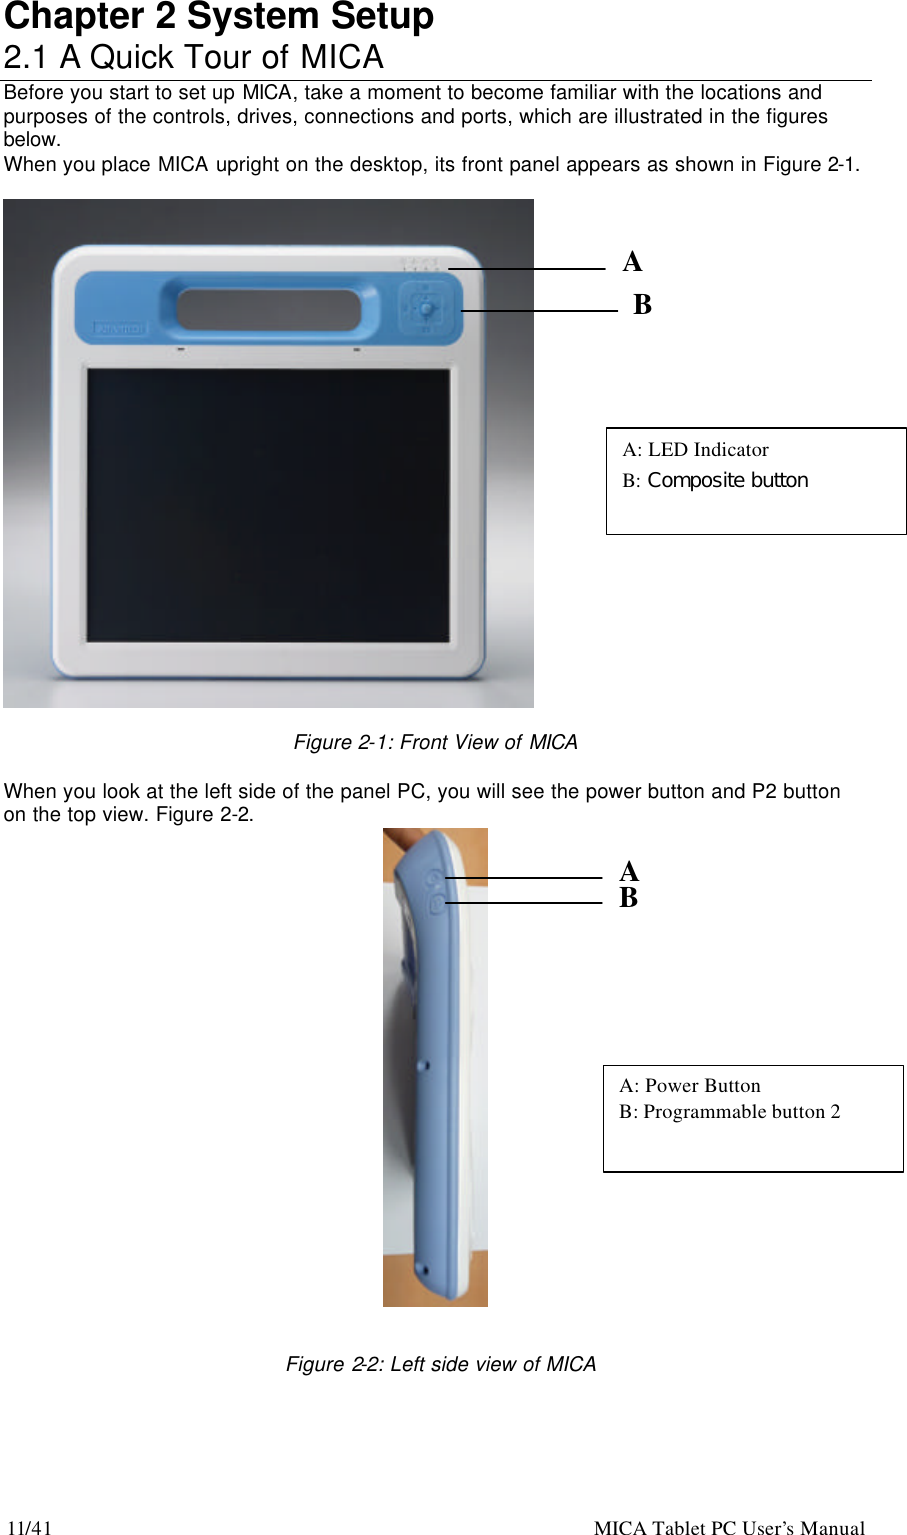 11/41                                                    MICA Tablet PC User’s Manual Chapter 2 System Setup 2.1 A Quick Tour of MICA                                                Before you start to set up MICA, take a moment to become familiar with the locations and purposes of the controls, drives, connections and ports, which are illustrated in the figures below. When you place MICA upright on the desktop, its front panel appears as shown in Figure 2-1.    Figure 2-1: Front View of MICA  When you look at the left side of the panel PC, you will see the power button and P2 button on the top view. Figure 2-2.         Figure 2-2: Left side view of MICA A B A: Power Button B: Programmable button 2 A B A: LED Indicator B: Composite button  